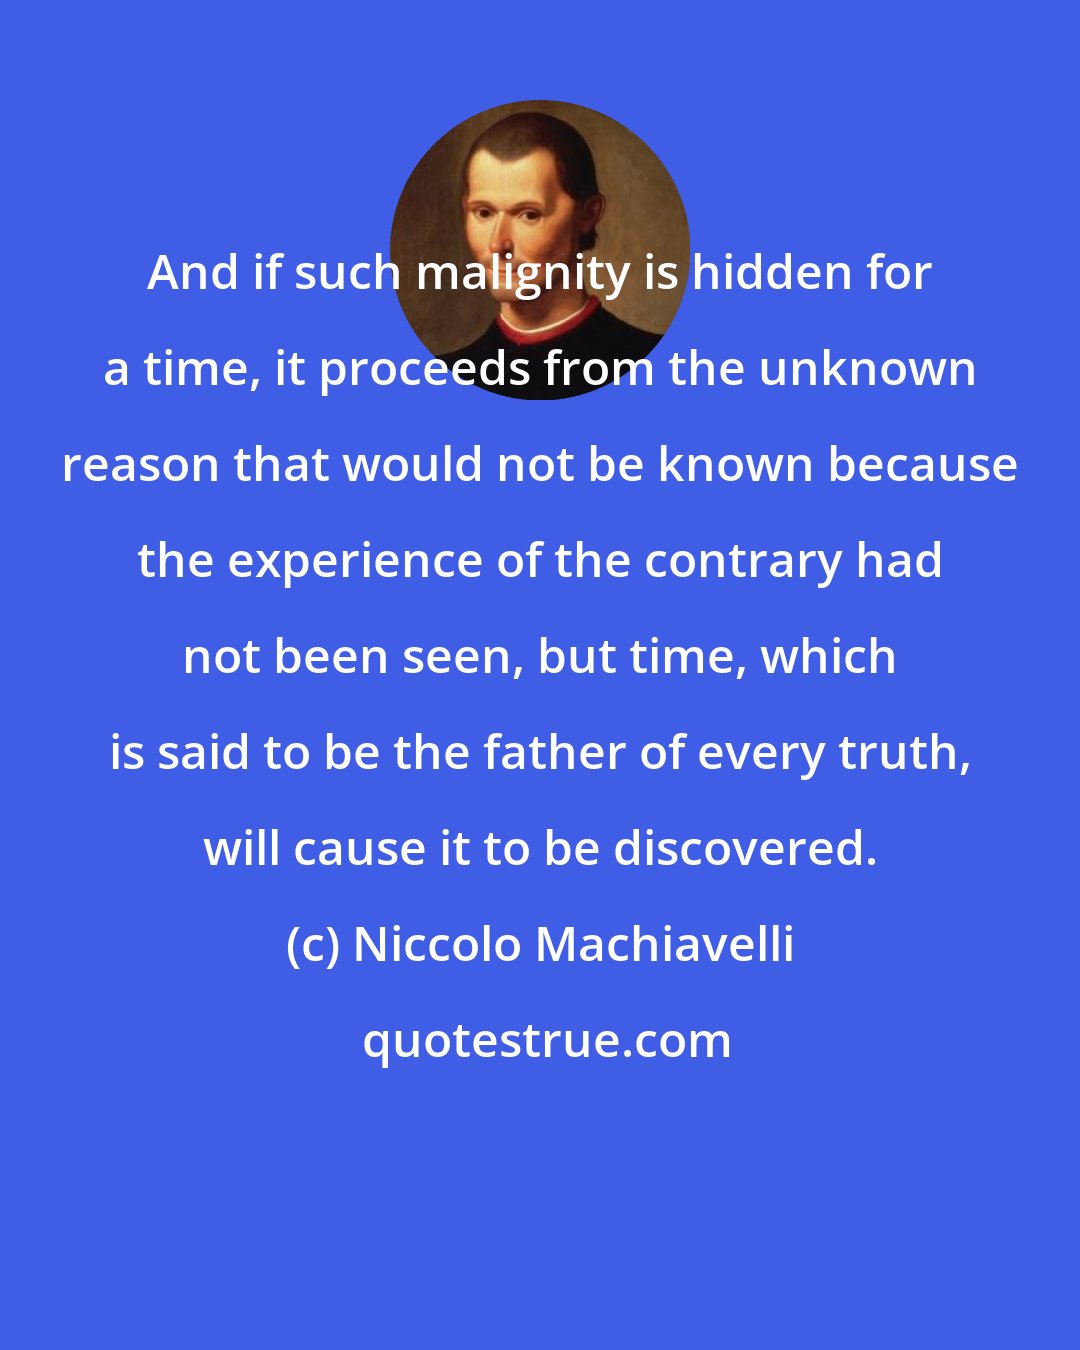 Niccolo Machiavelli: And if such malignity is hidden for a time, it proceeds from the unknown reason that would not be known because the experience of the contrary had not been seen, but time, which is said to be the father of every truth, will cause it to be discovered.